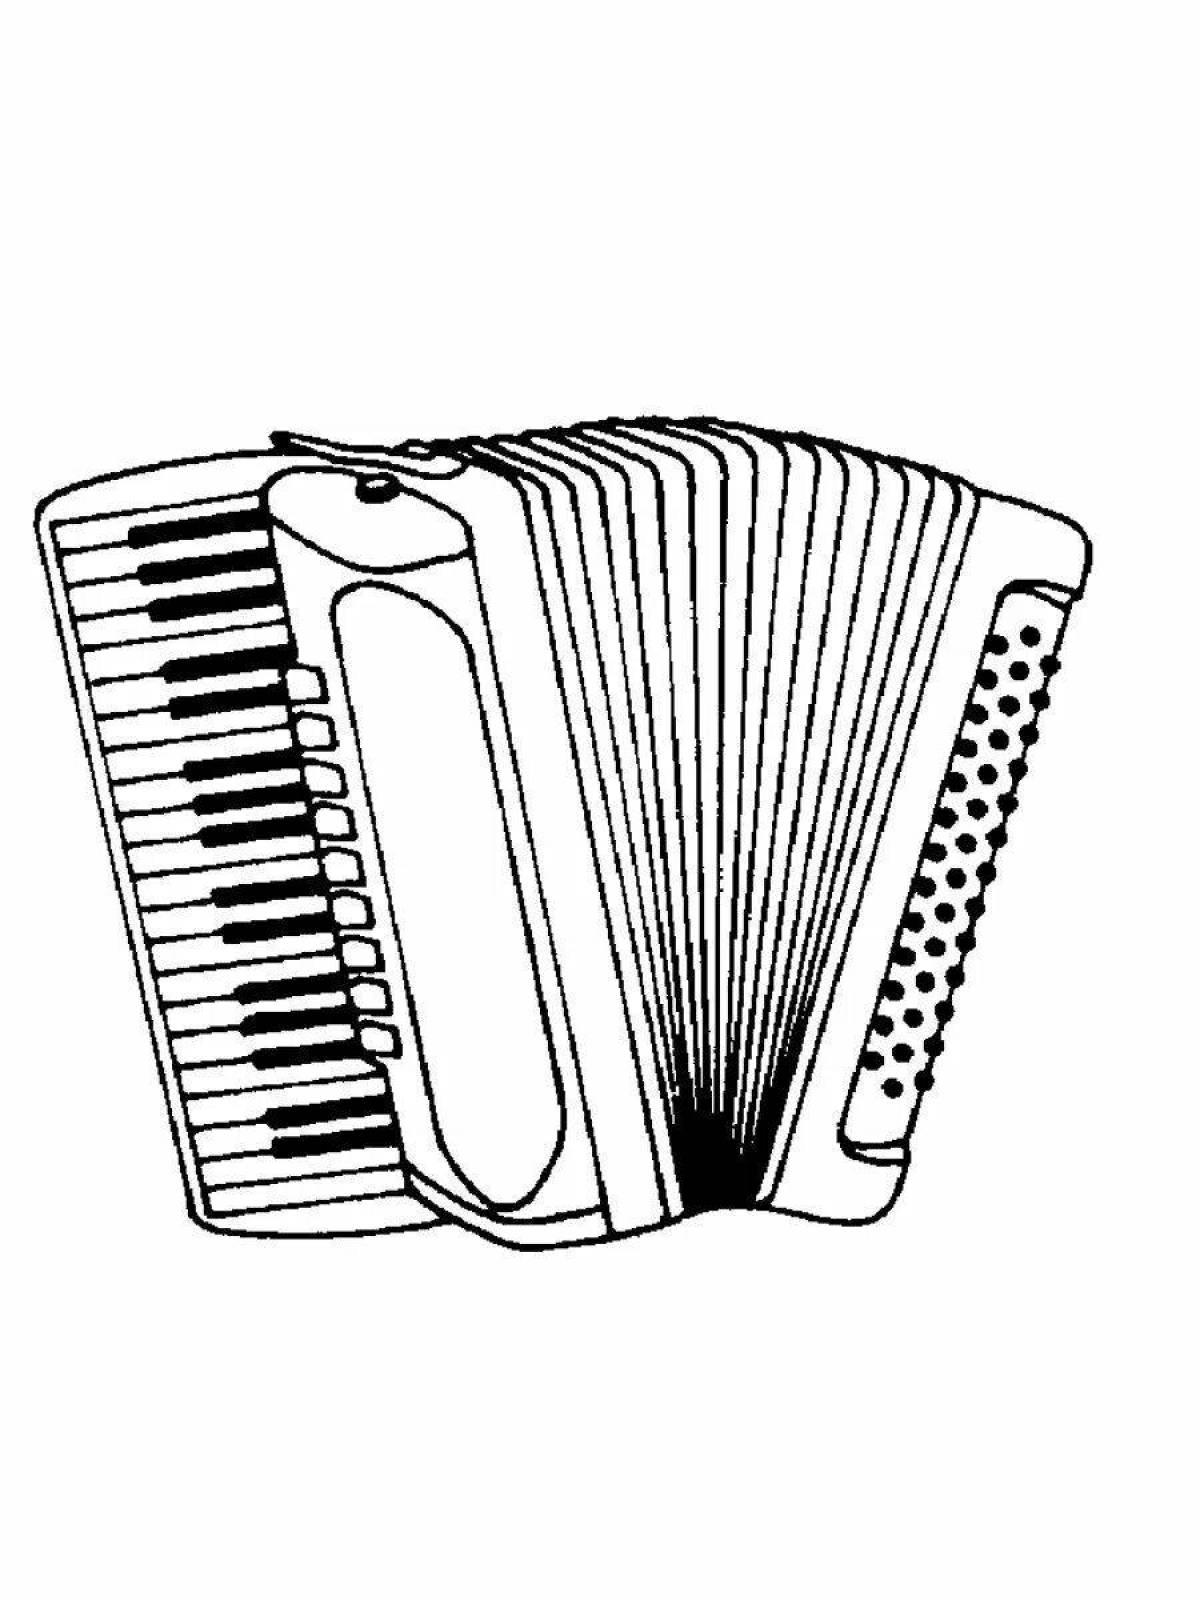 Playful accordion musical instruments for children